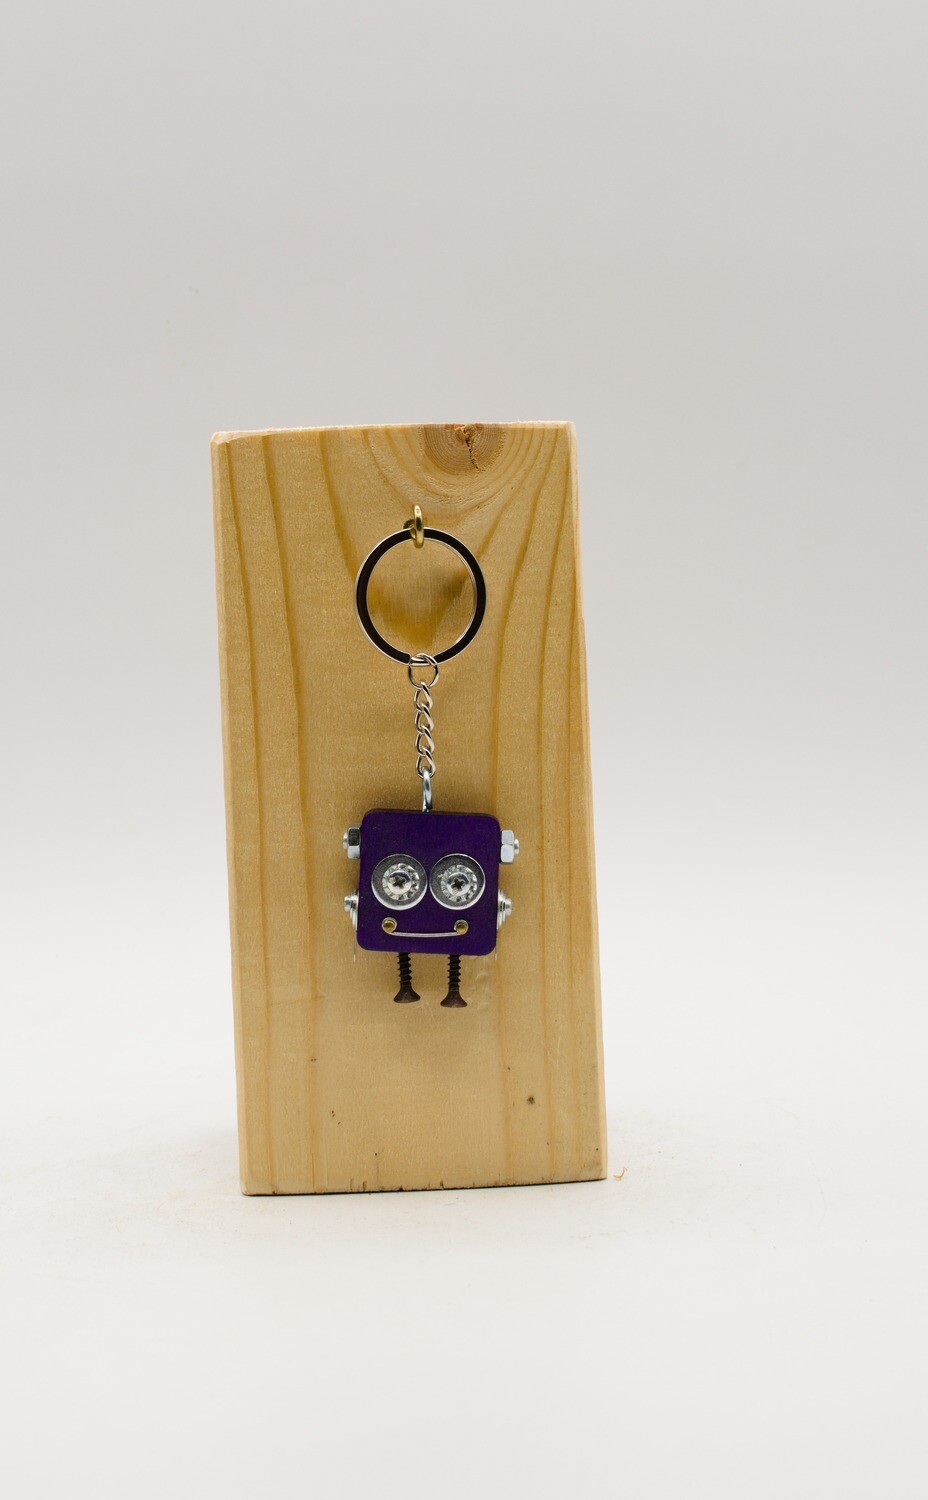 ​Robot key holder. Keychain with bolts and screws laser cut